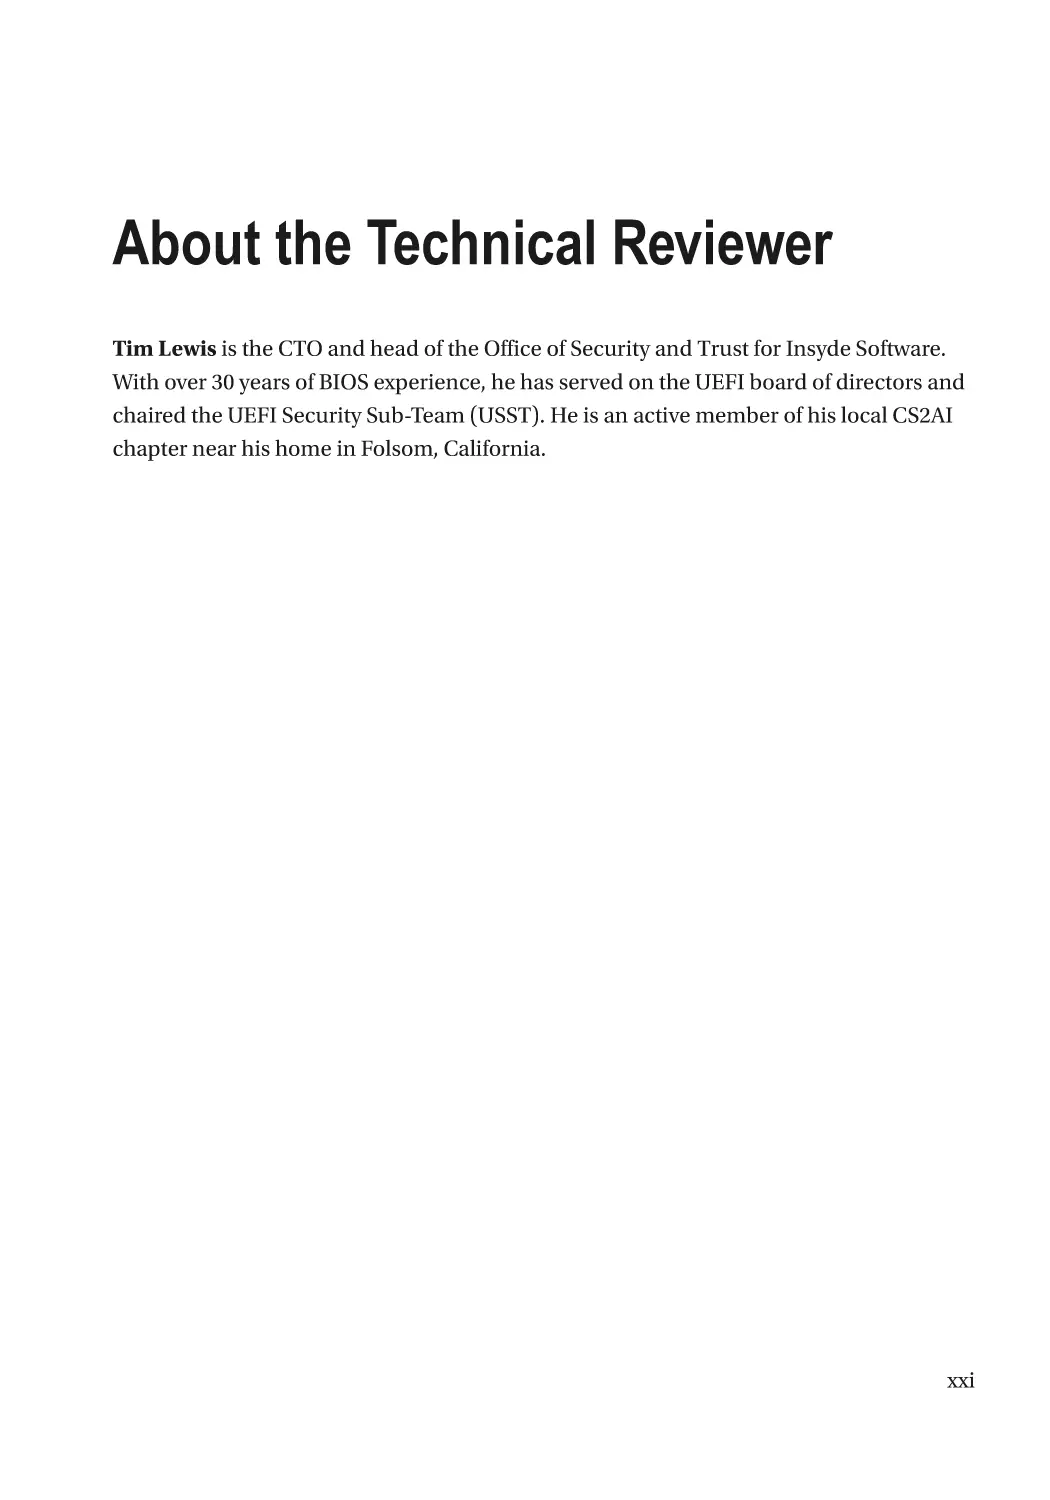 About the Technical Reviewer